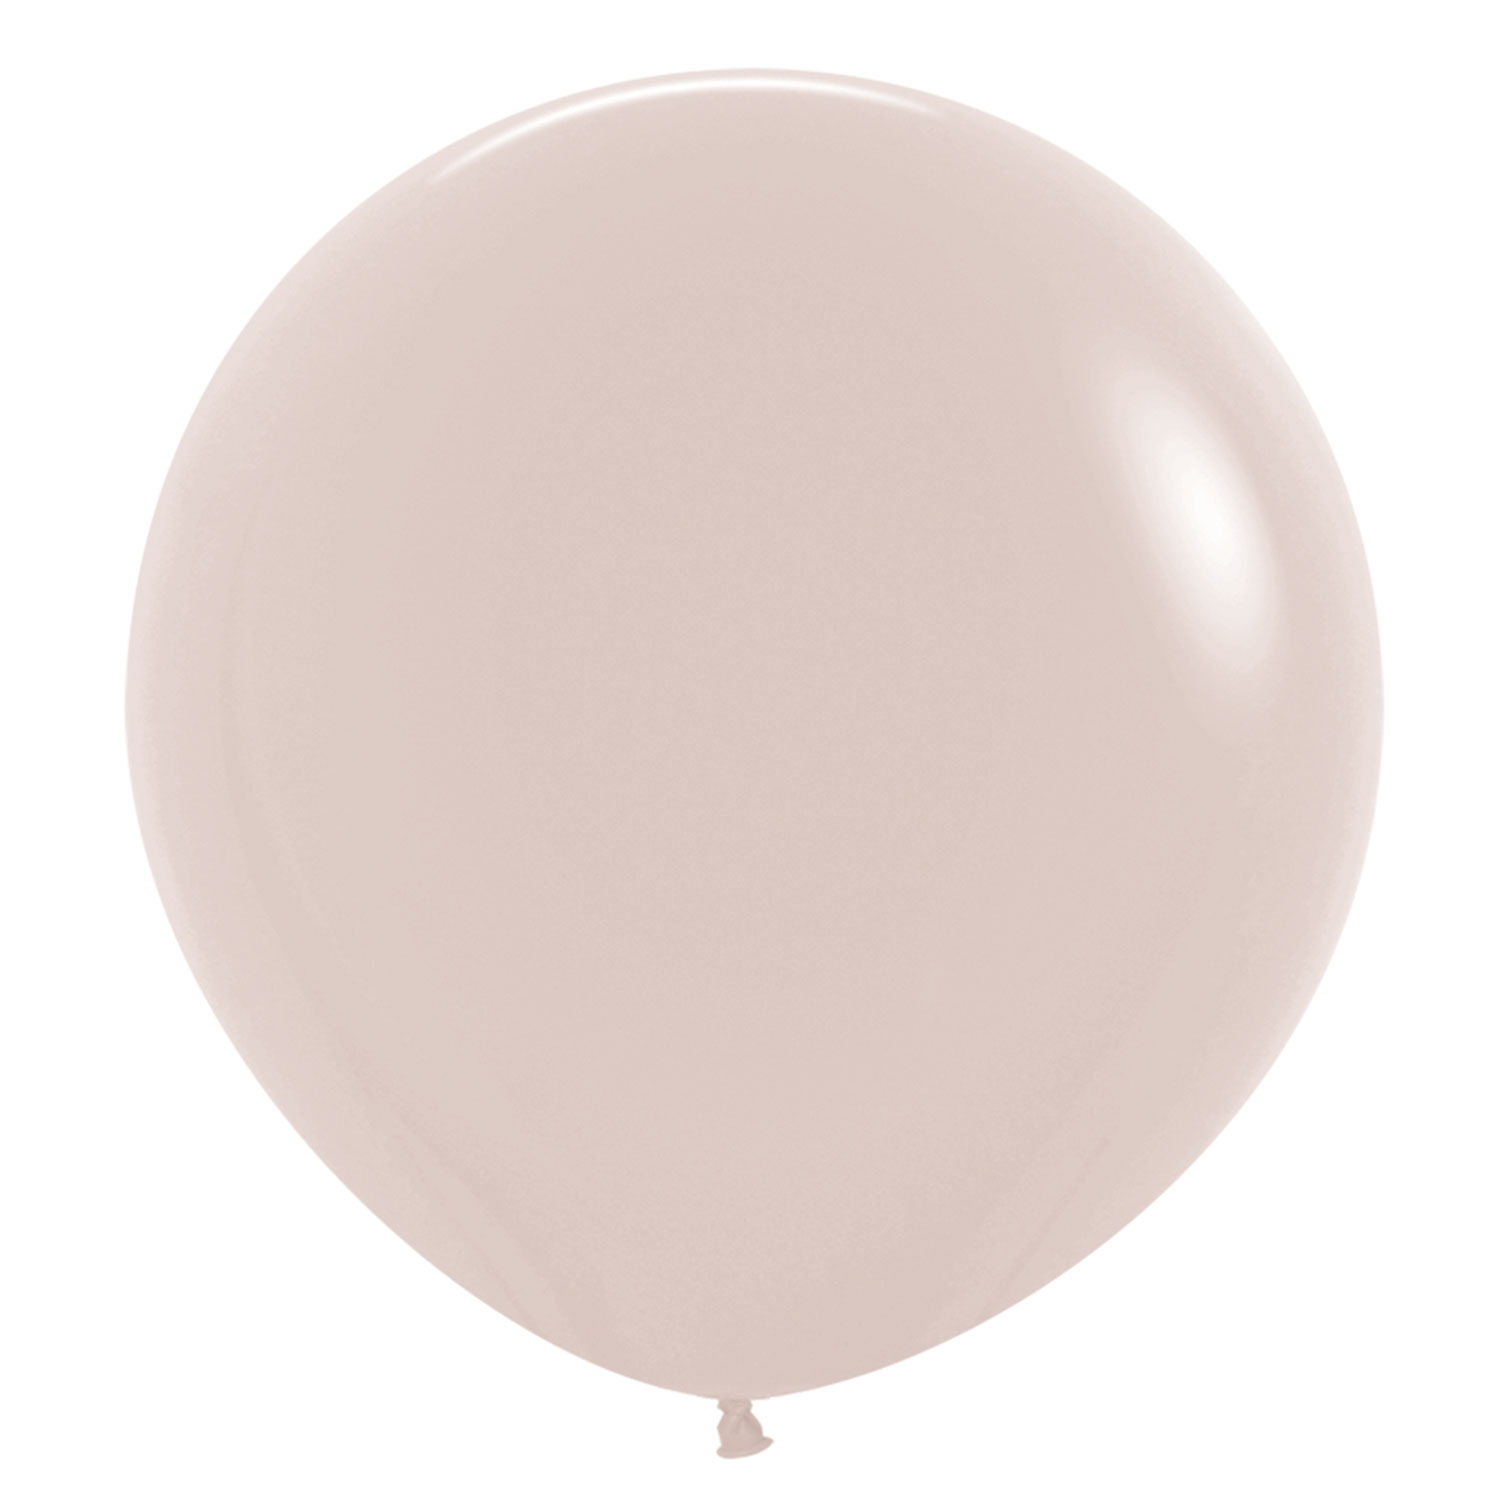 Sempertex White Sand Latex Balloons Birthday Party 5 and 24 inch